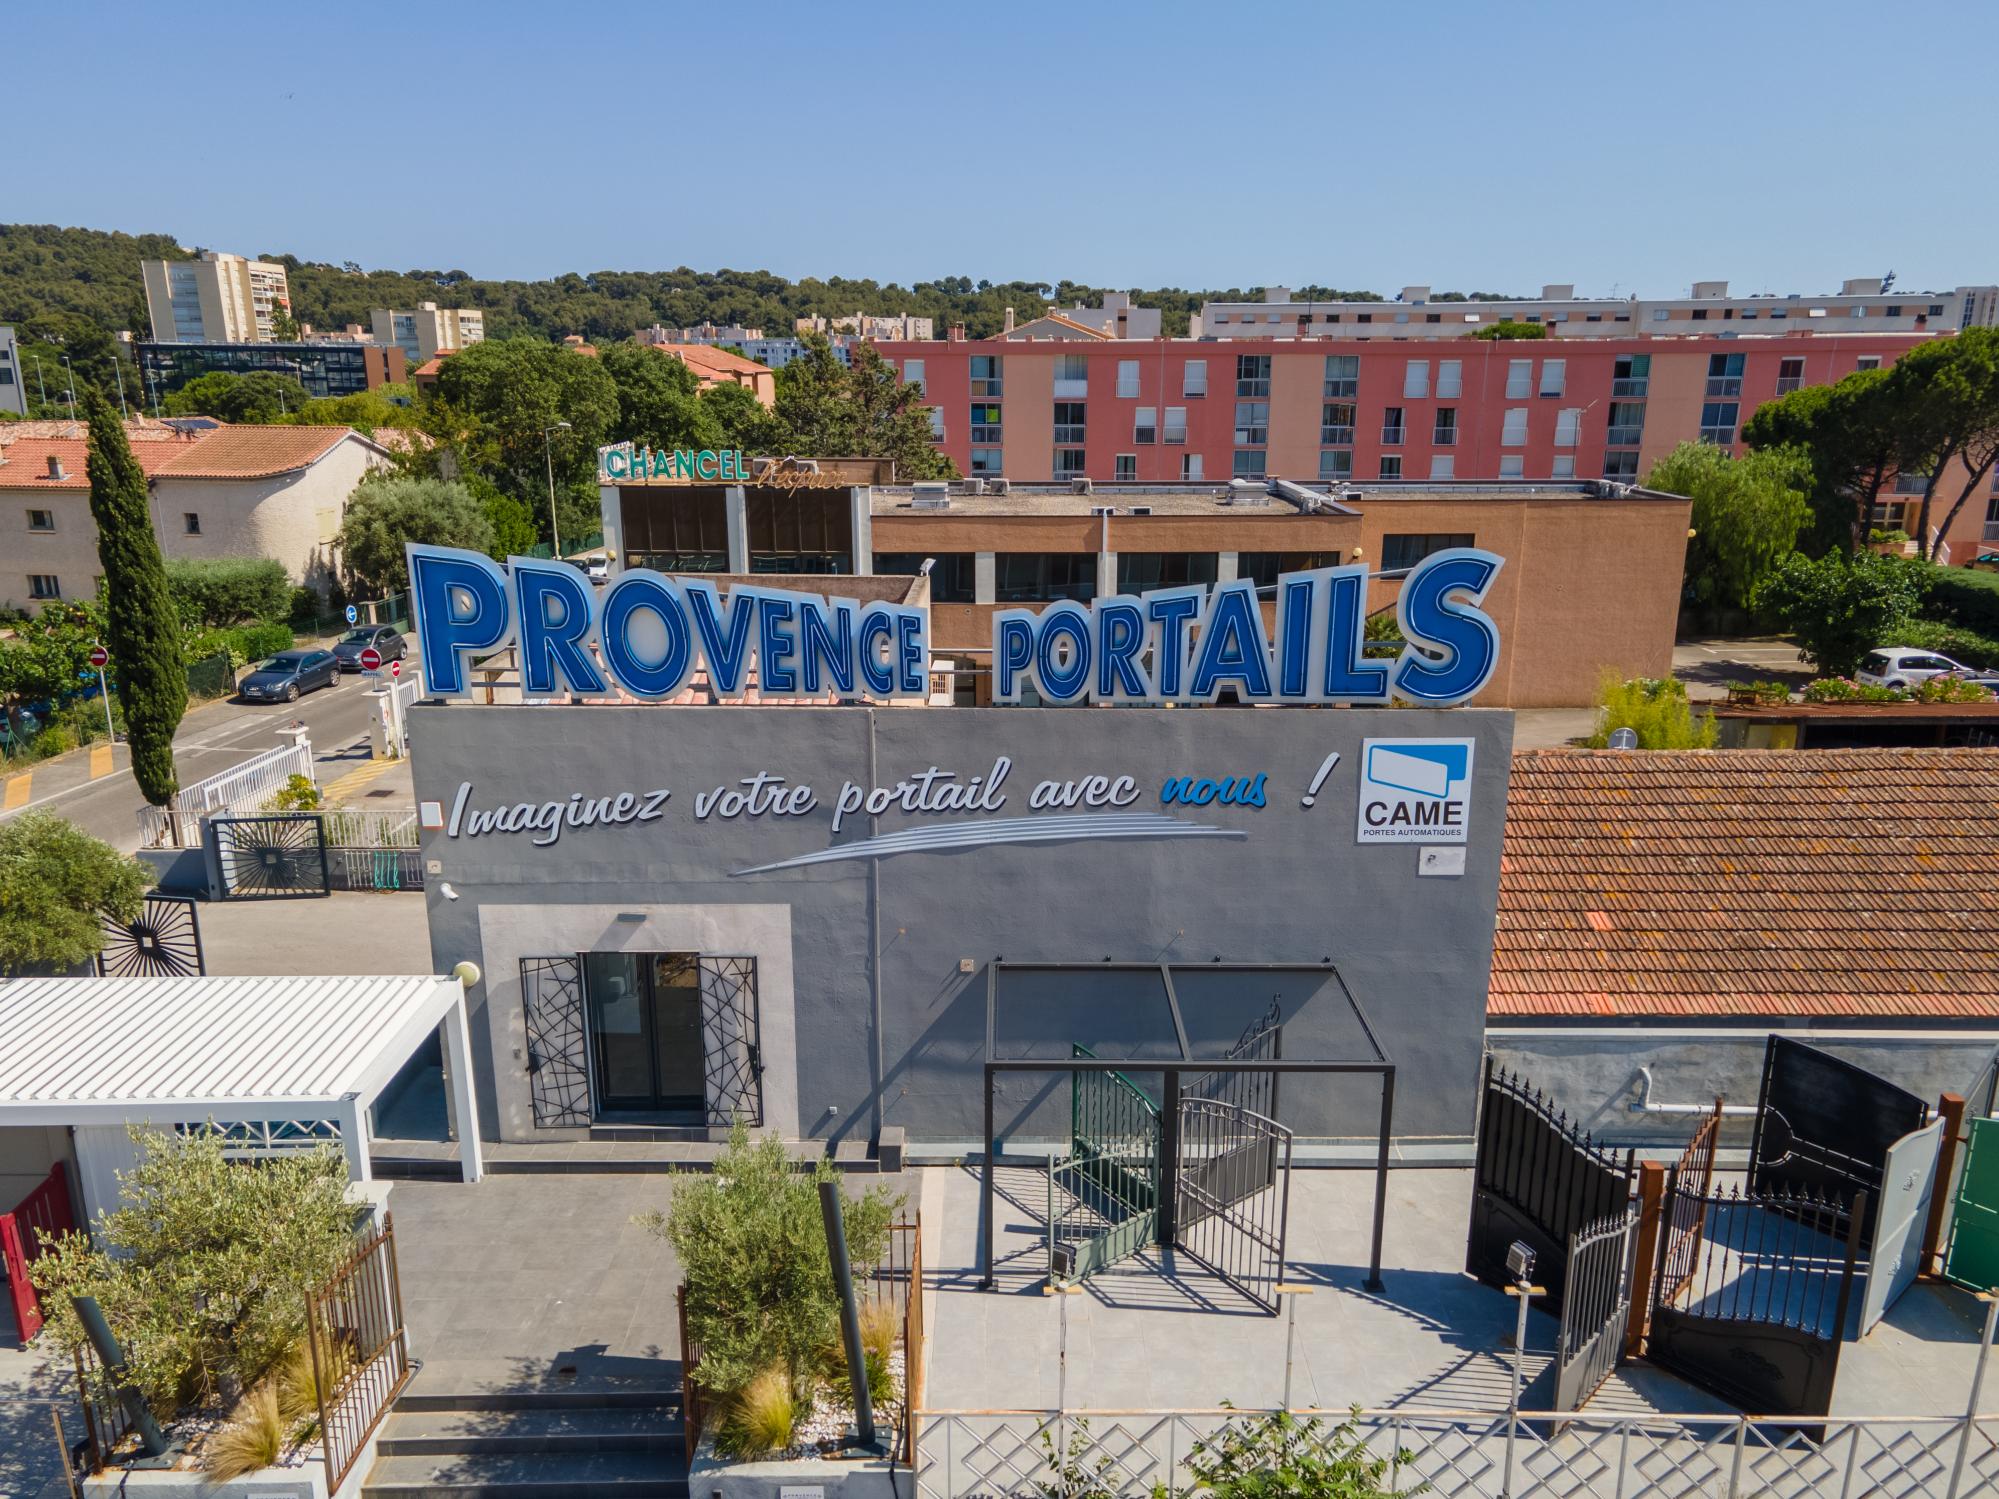 Showroom Provence Portails